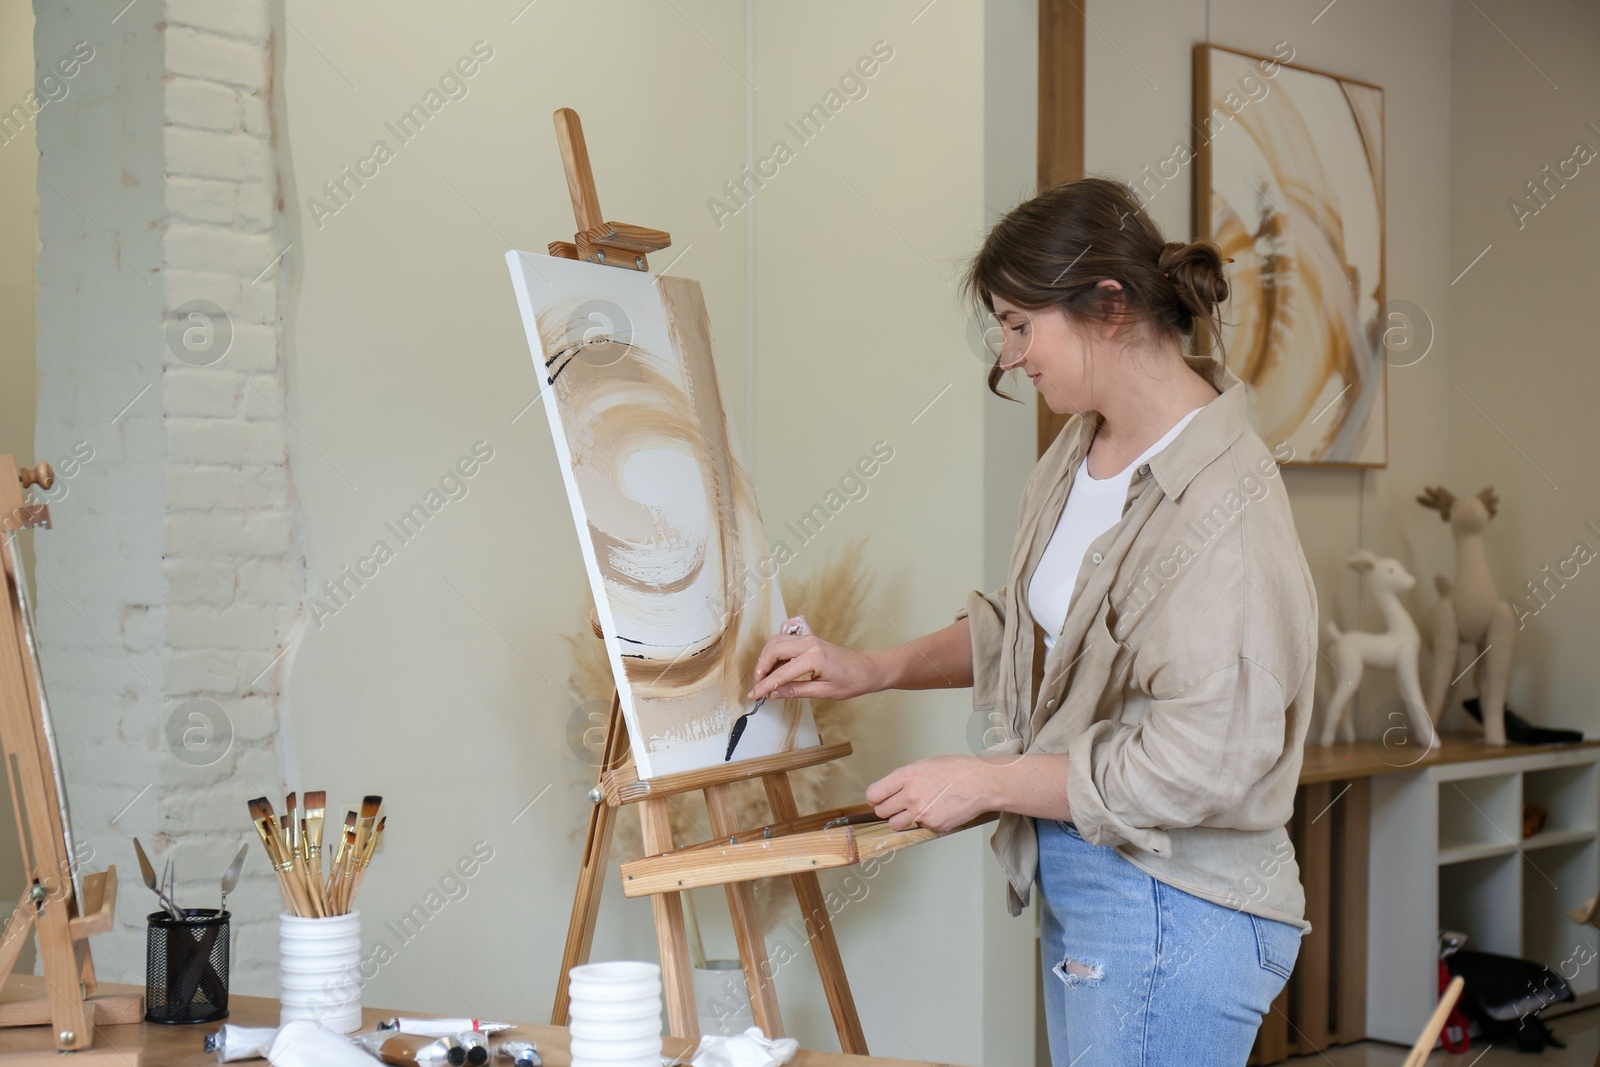 Photo of Woman with palette knife drawing picture in studio